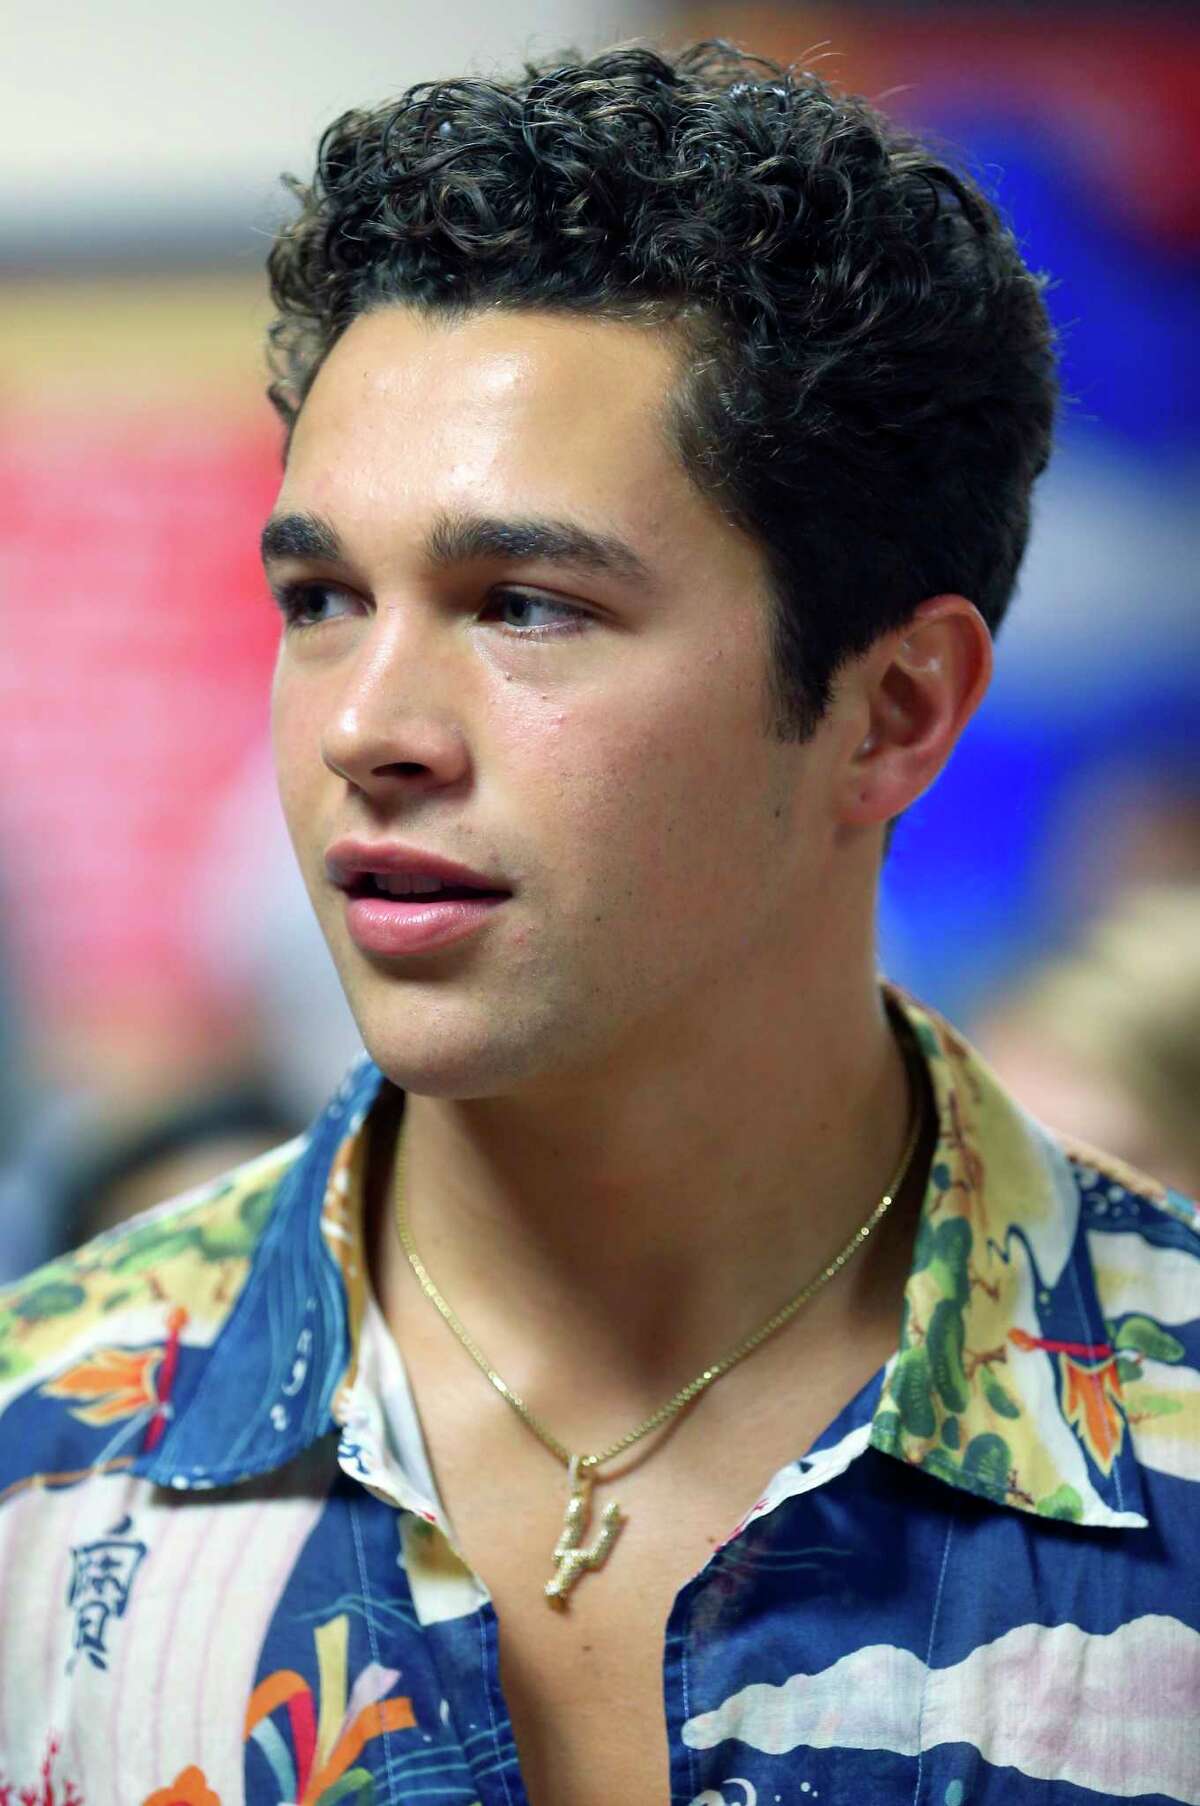 San Antonio native Austin Mahone is seen Tuesday, Aug. 21, 2018 at Palo Alto Elementary on the city's south side. In addition to performing two songs for the school's students, Mahone helped distribute school supplies from San Antonio Youth Educational Support Project.